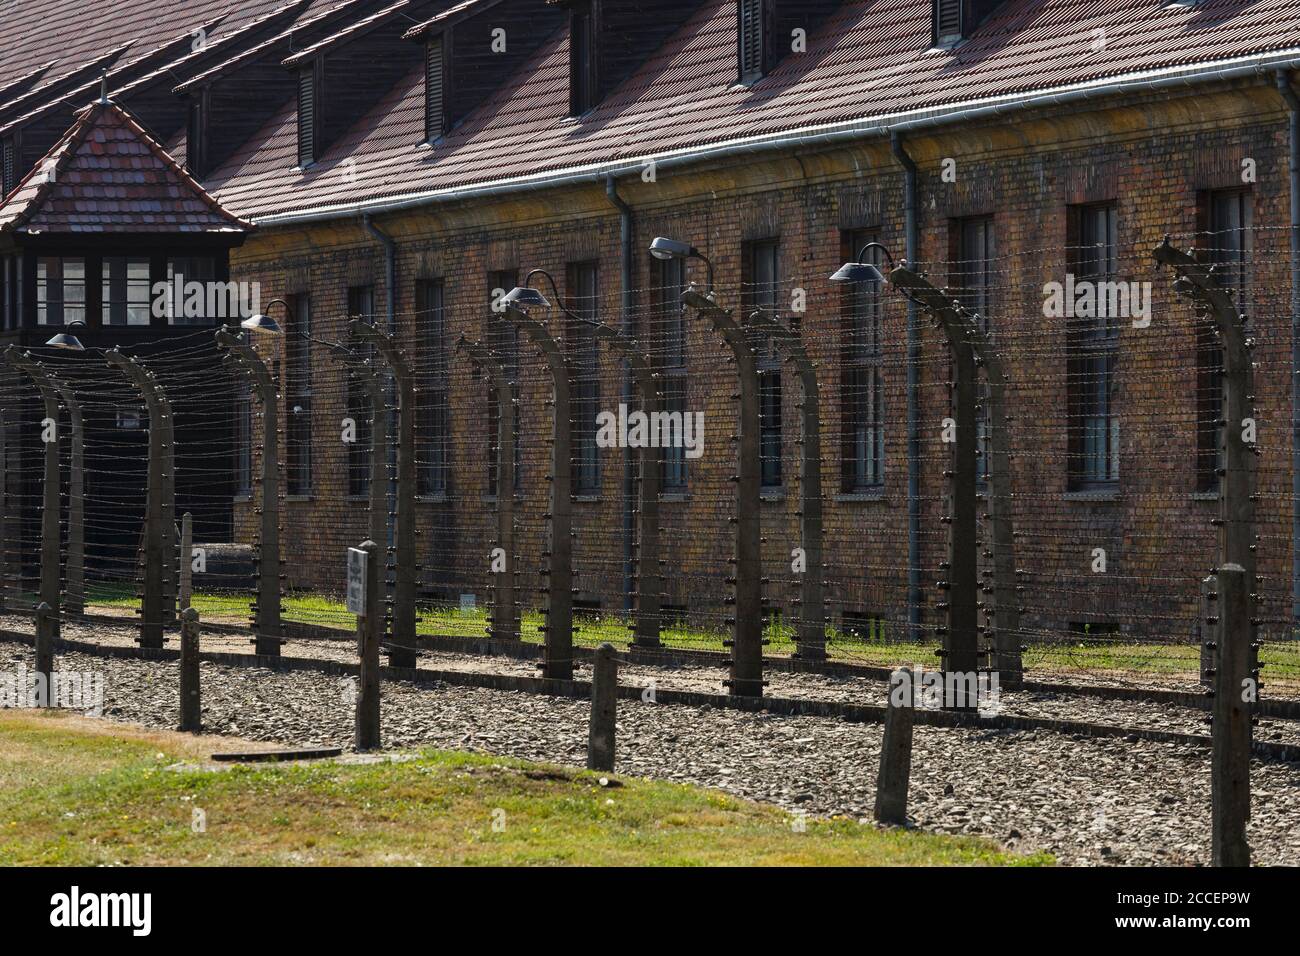 Oswiecim, Poland - August 22, 2018: Electric fence in the Memorial and Museum Auschwitz-Birkenau. former German Nazi Concentration and Extermination C Stock Photo